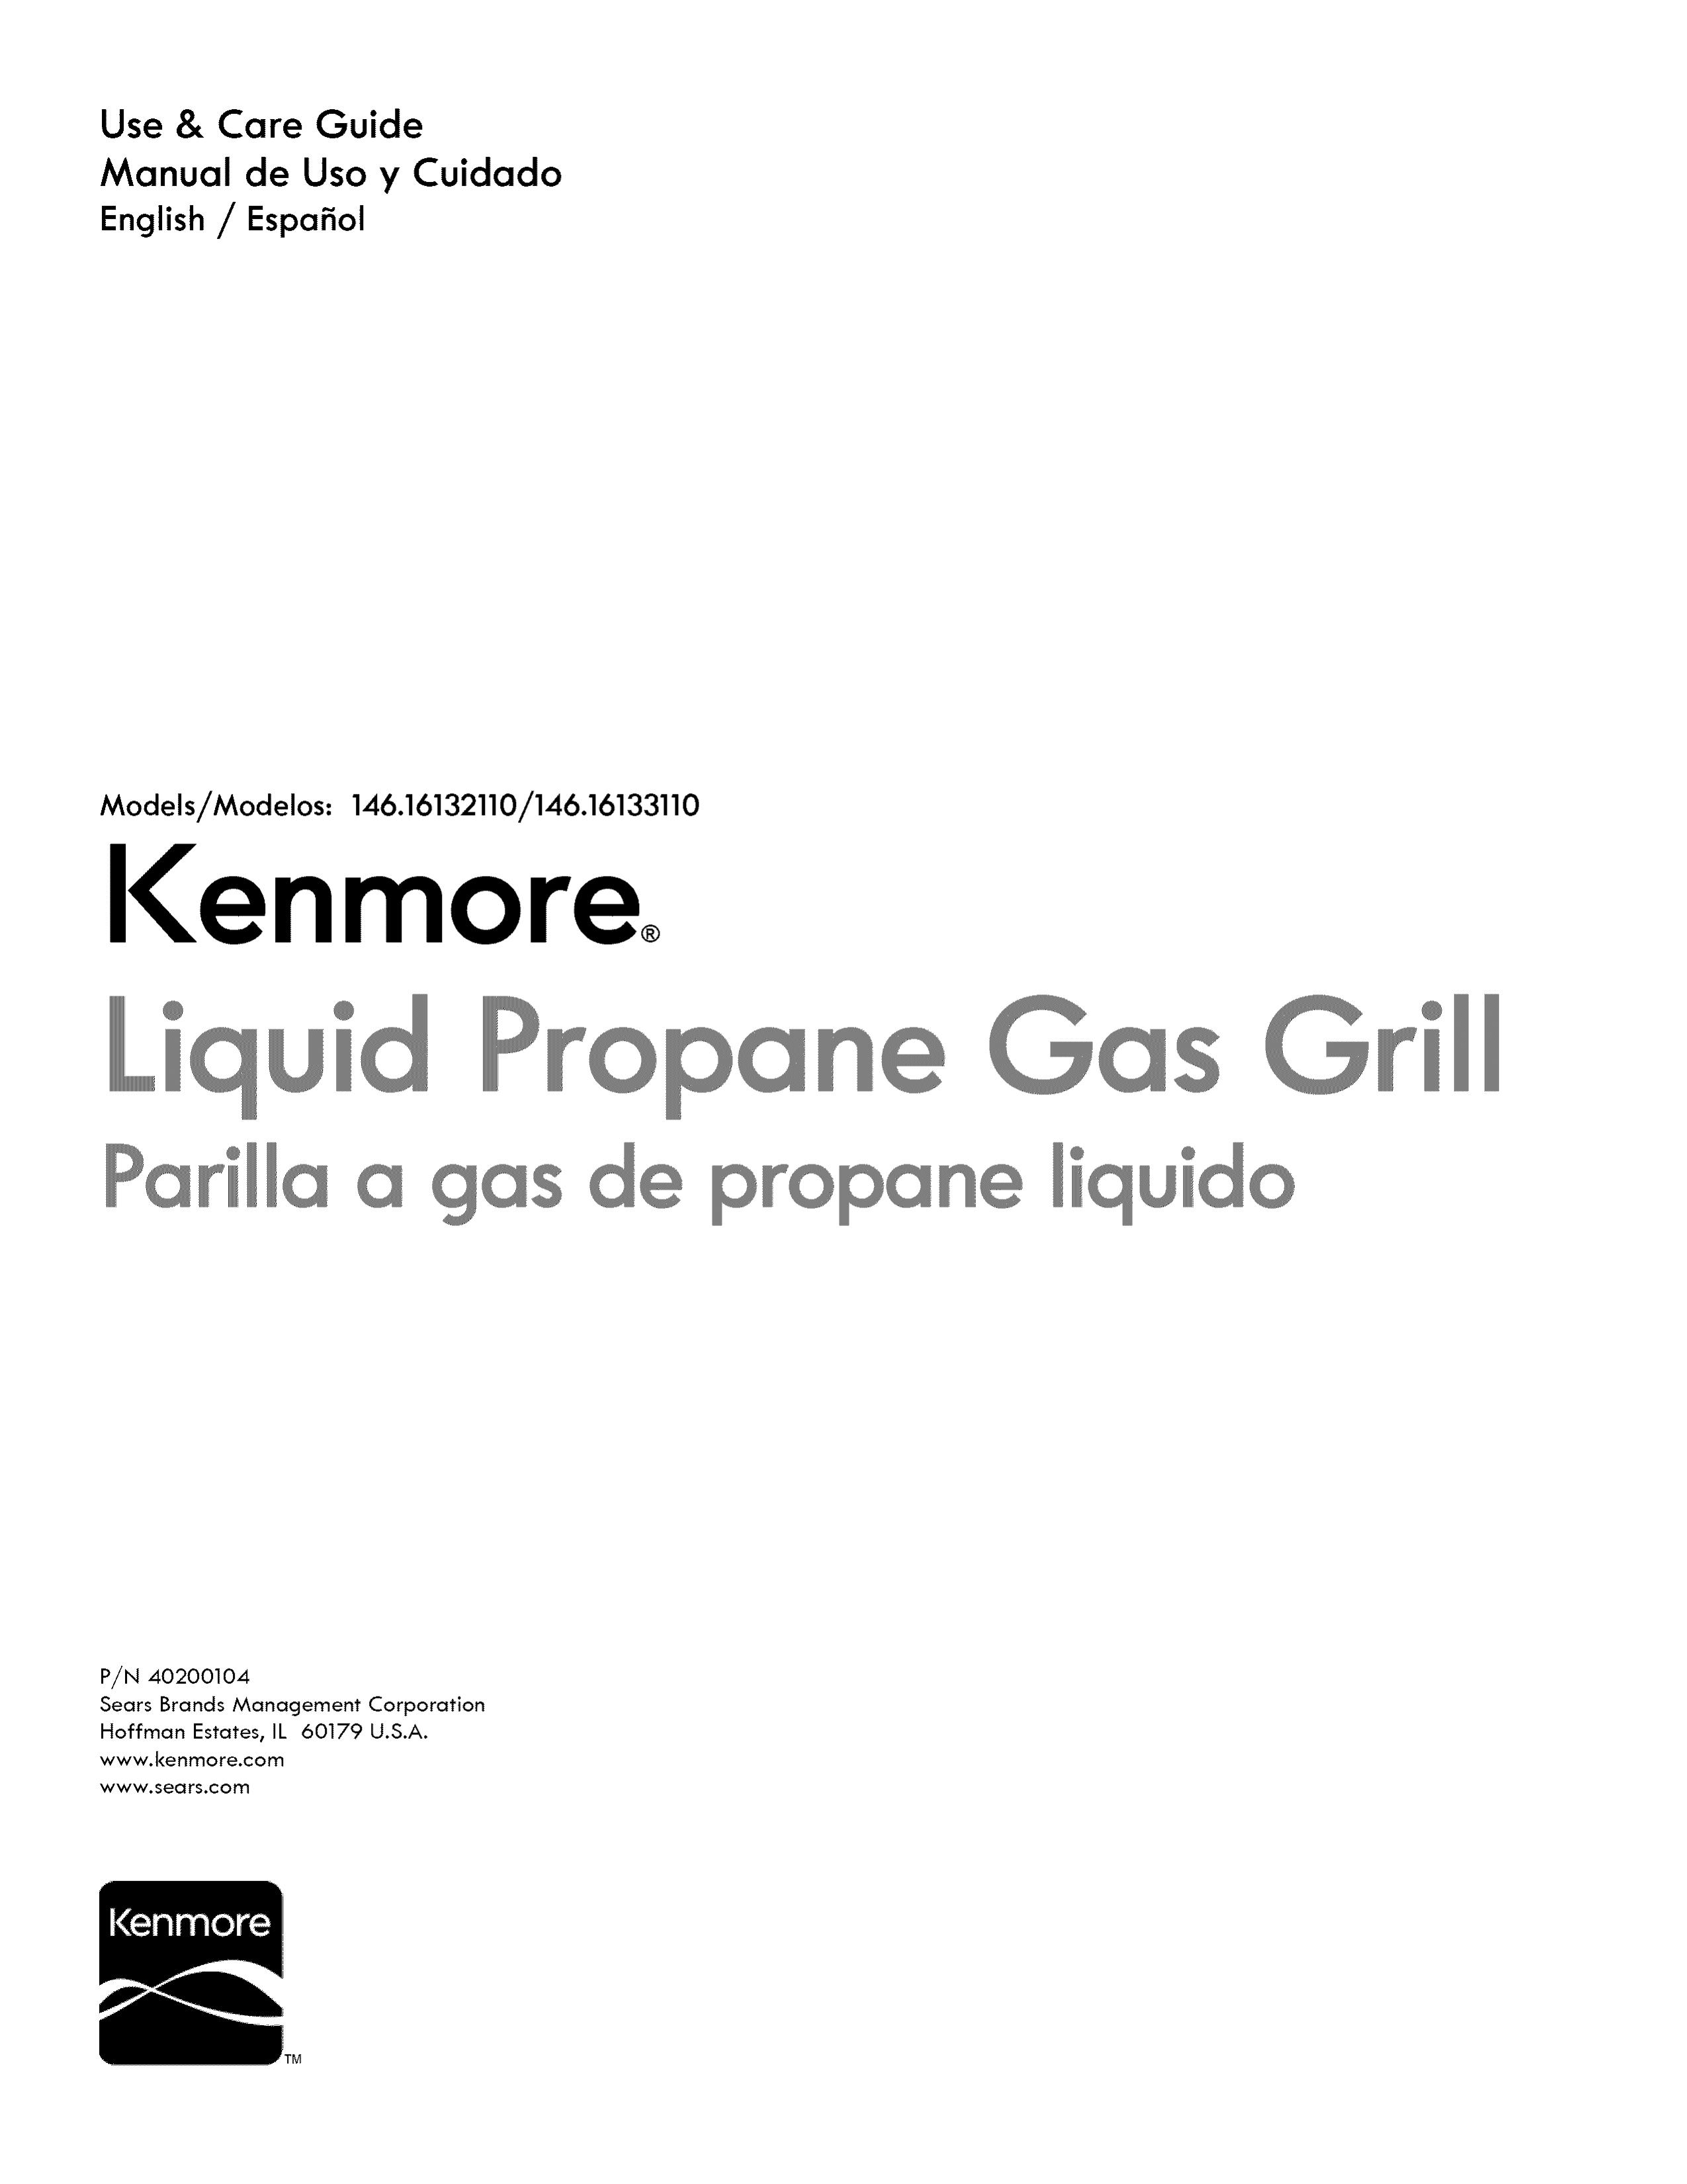 Kenmore 146.1613311 Gas Grill User Manual